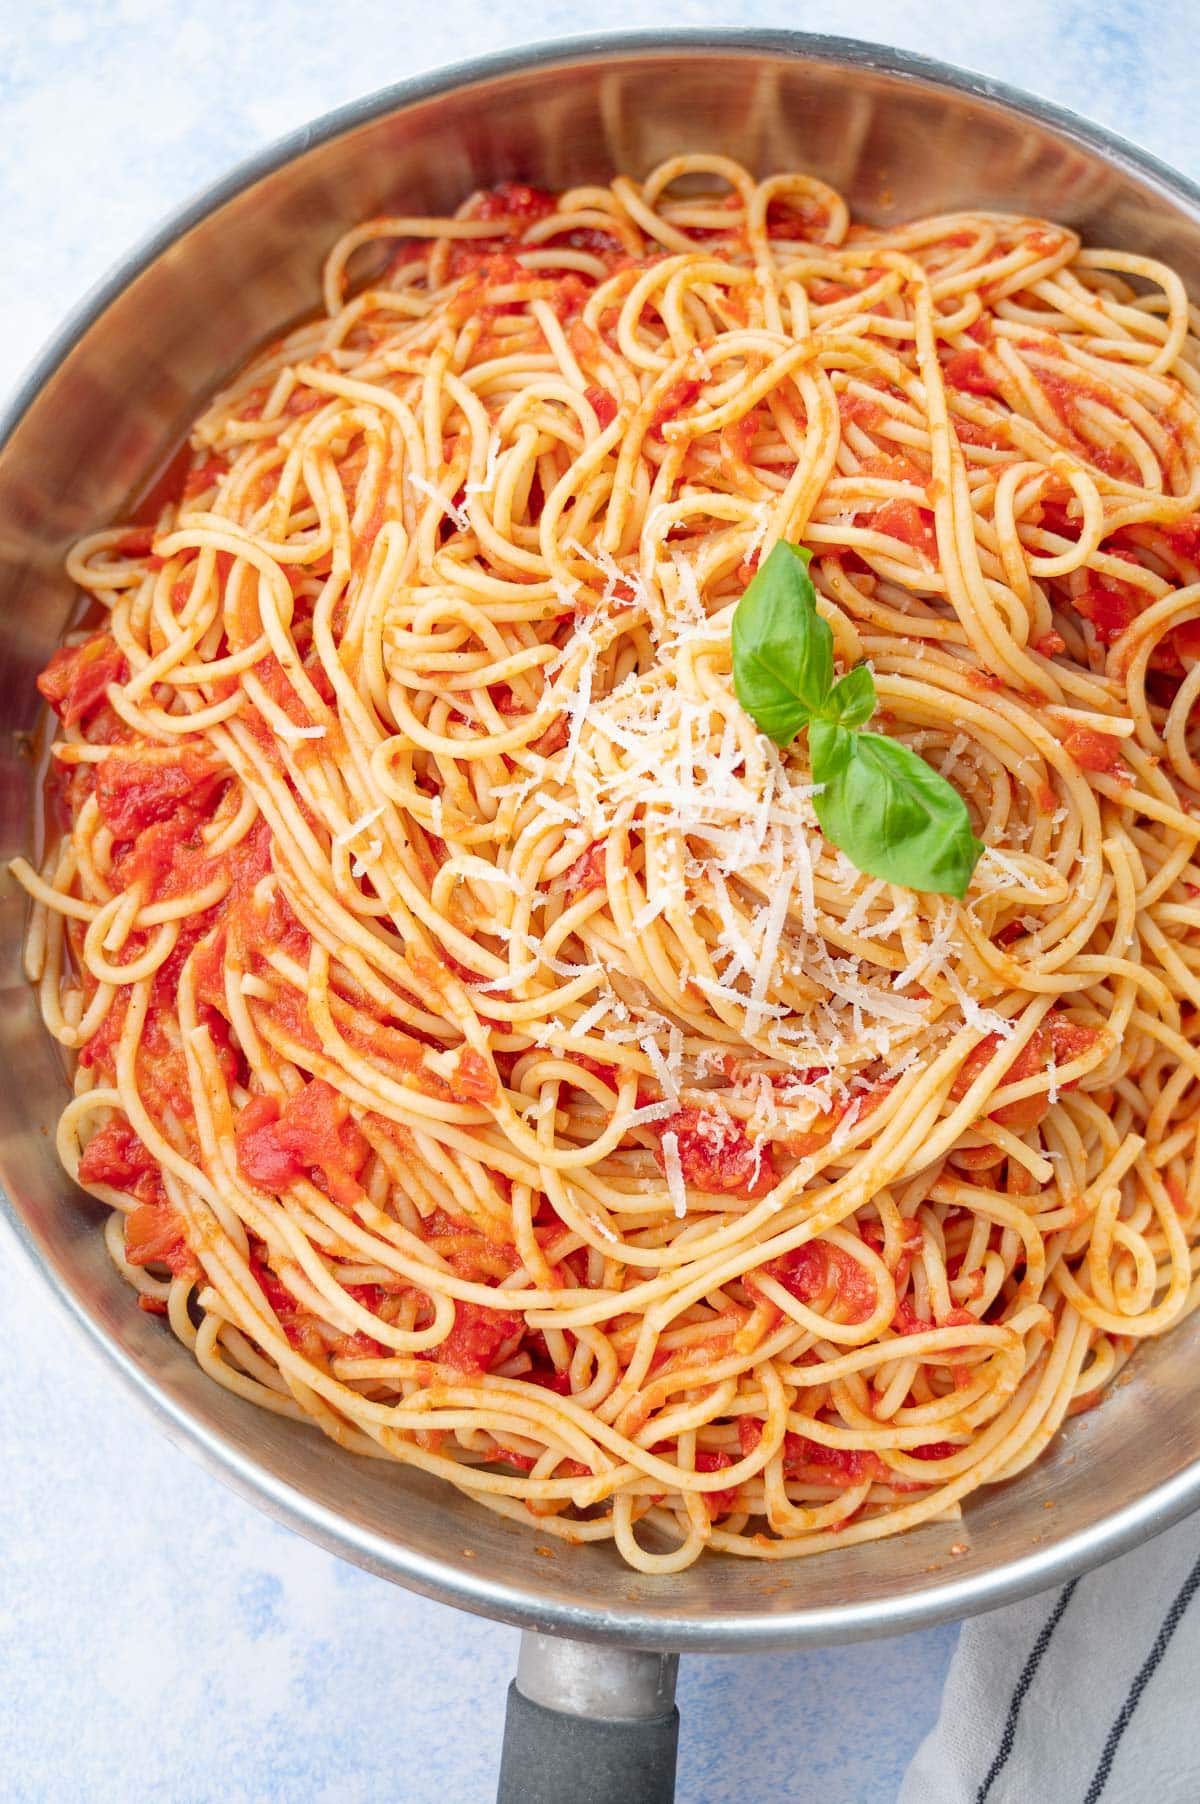 Spaghetti Pomodoro (from 'the Bear') in a frying pan.